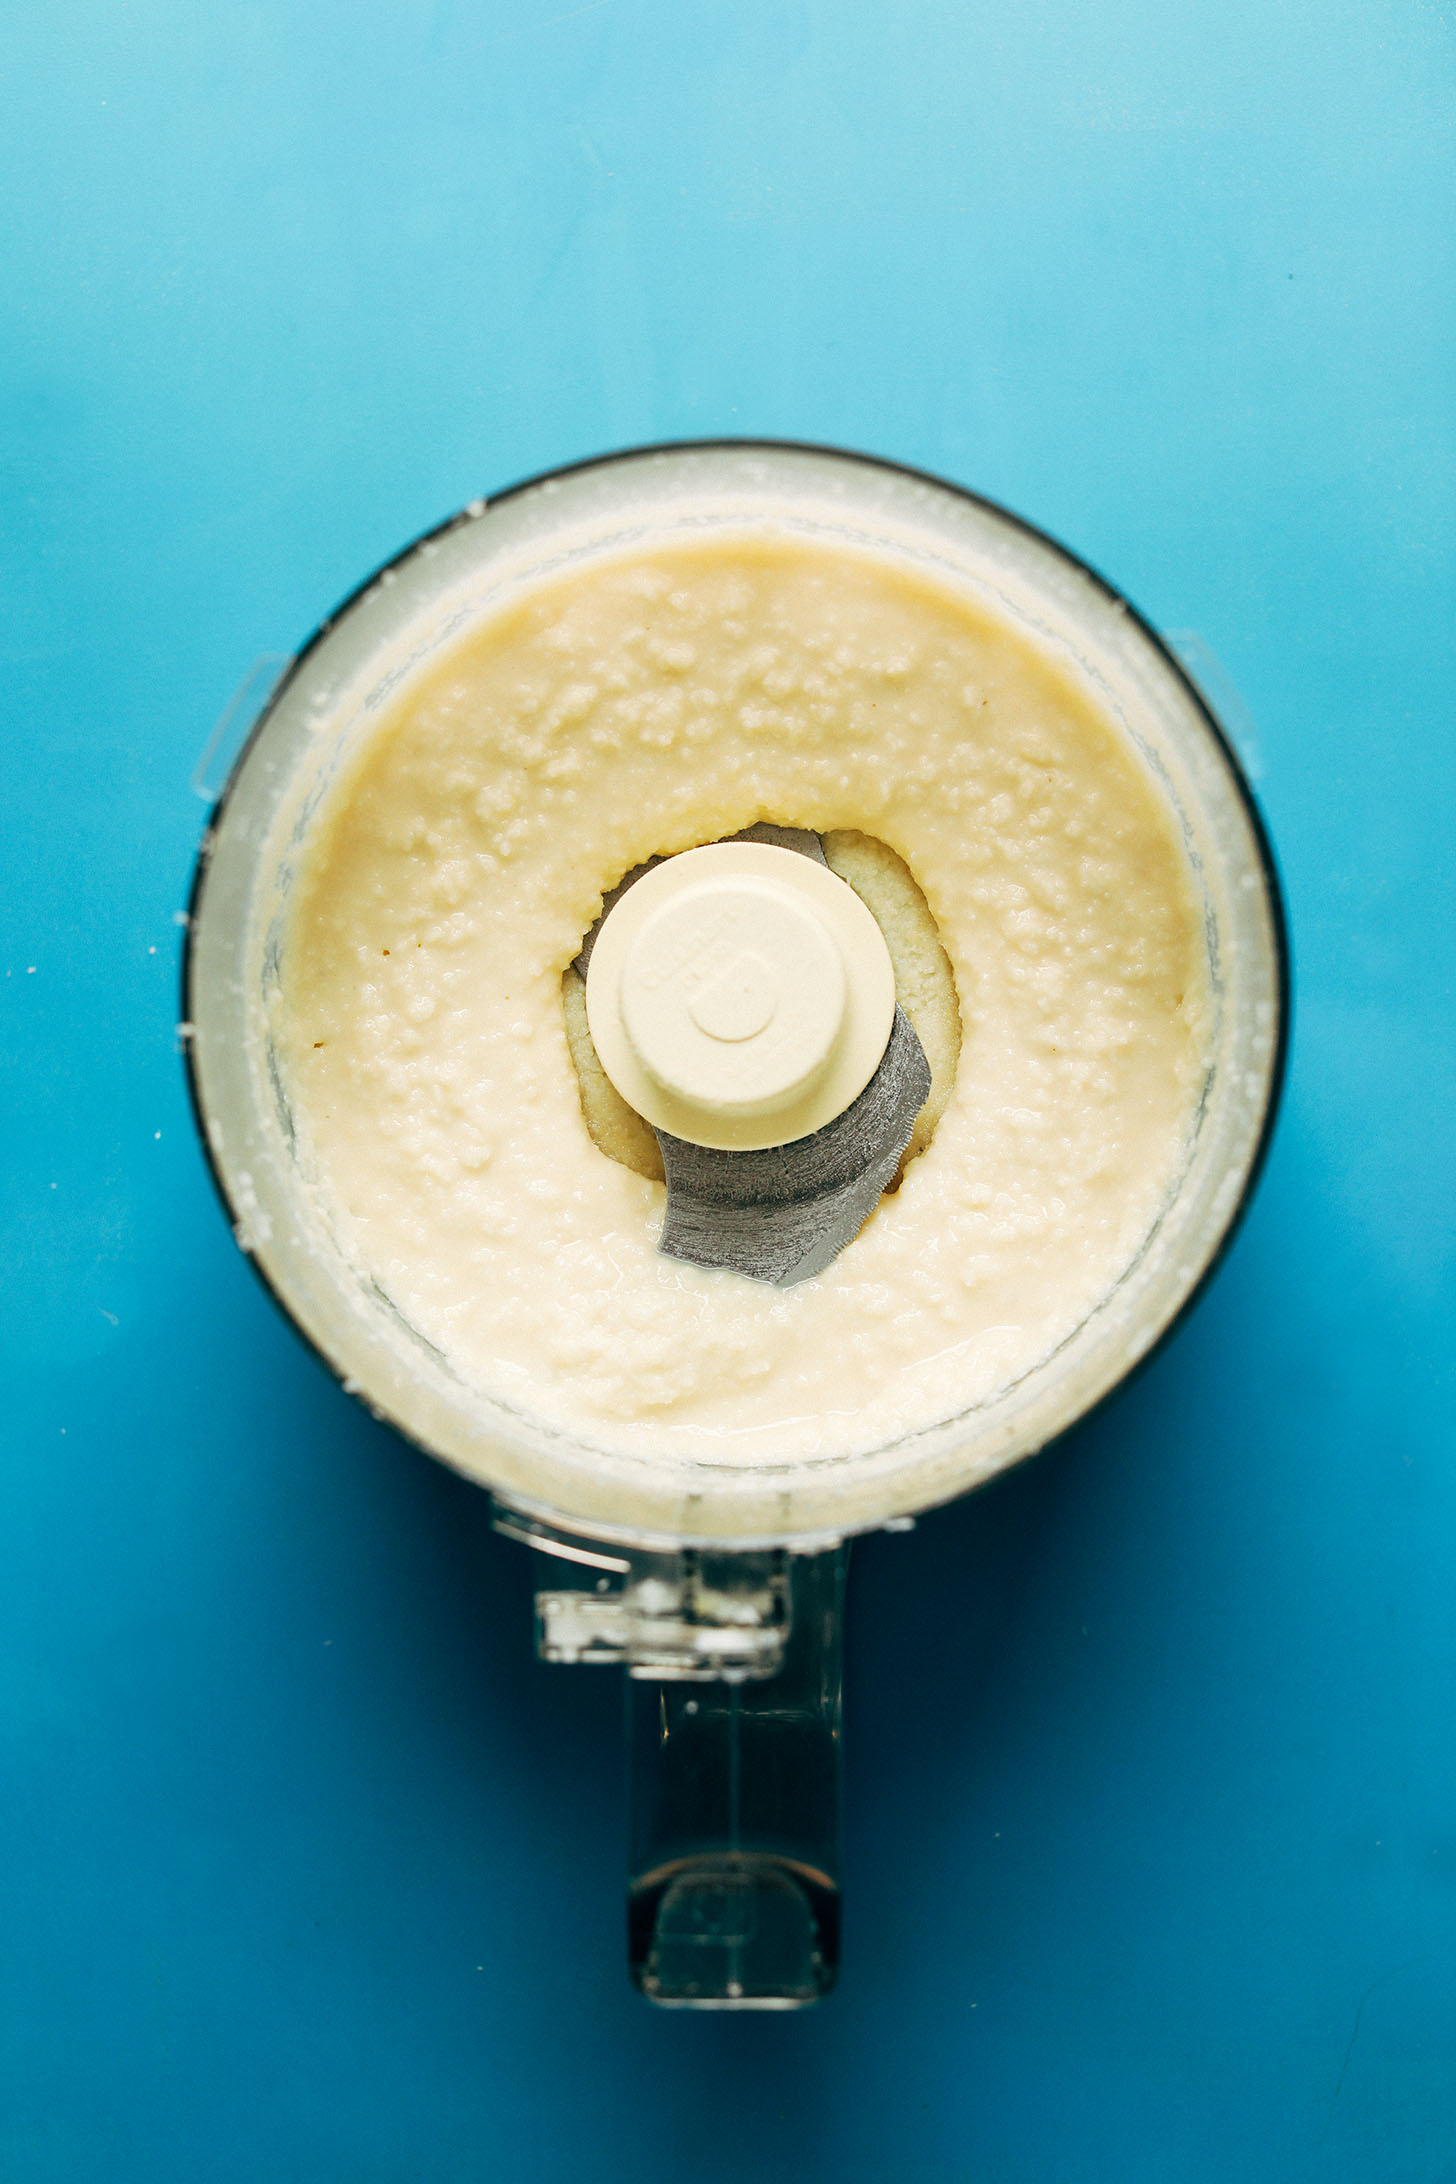 Food processor filled with delicious homemade coconut butter